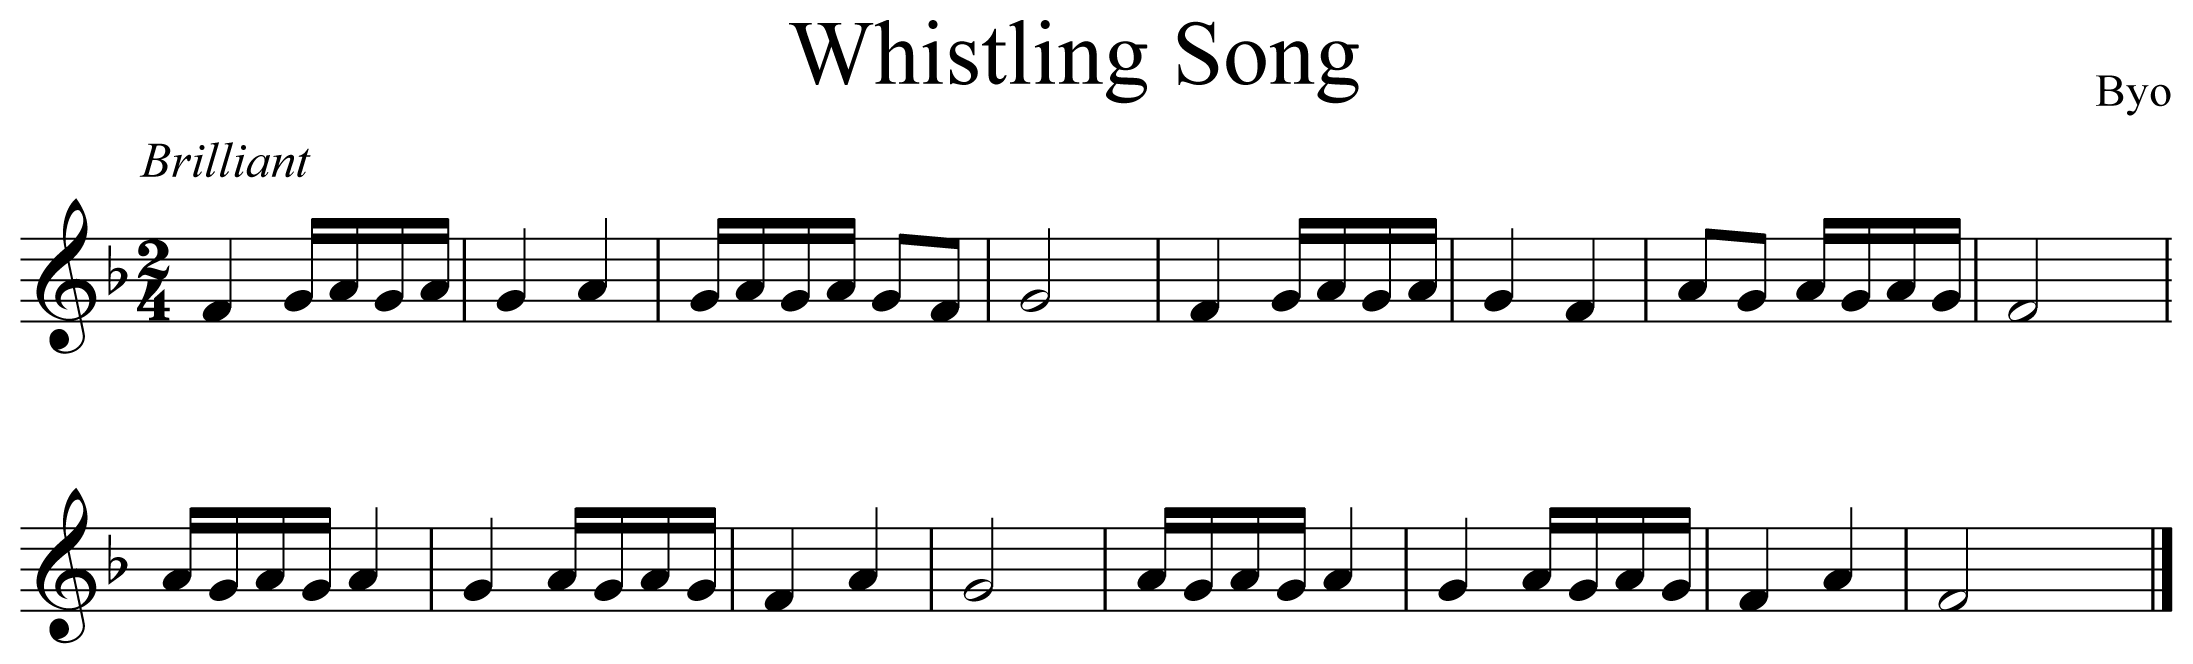 Whistling Song Music Notation Trumpet